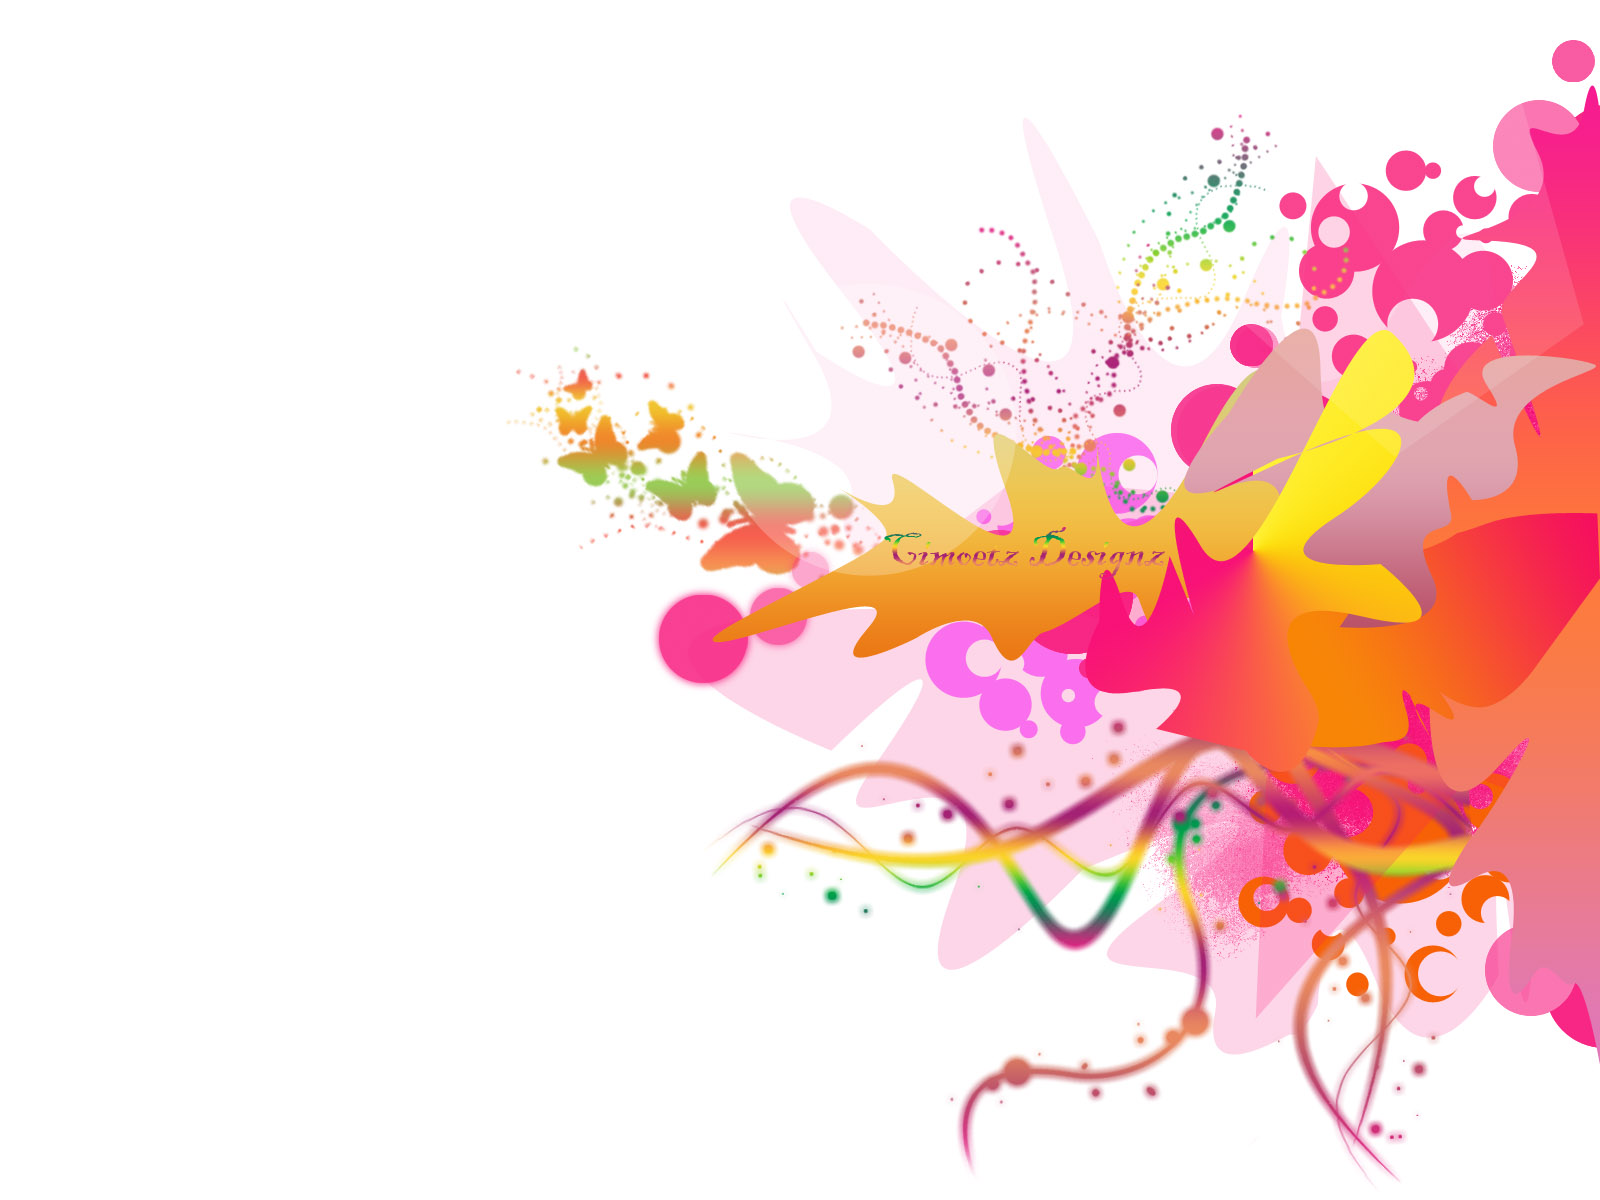 Sprinkle Bloomy Design Colorful Background Wallpaper For Powerpoint